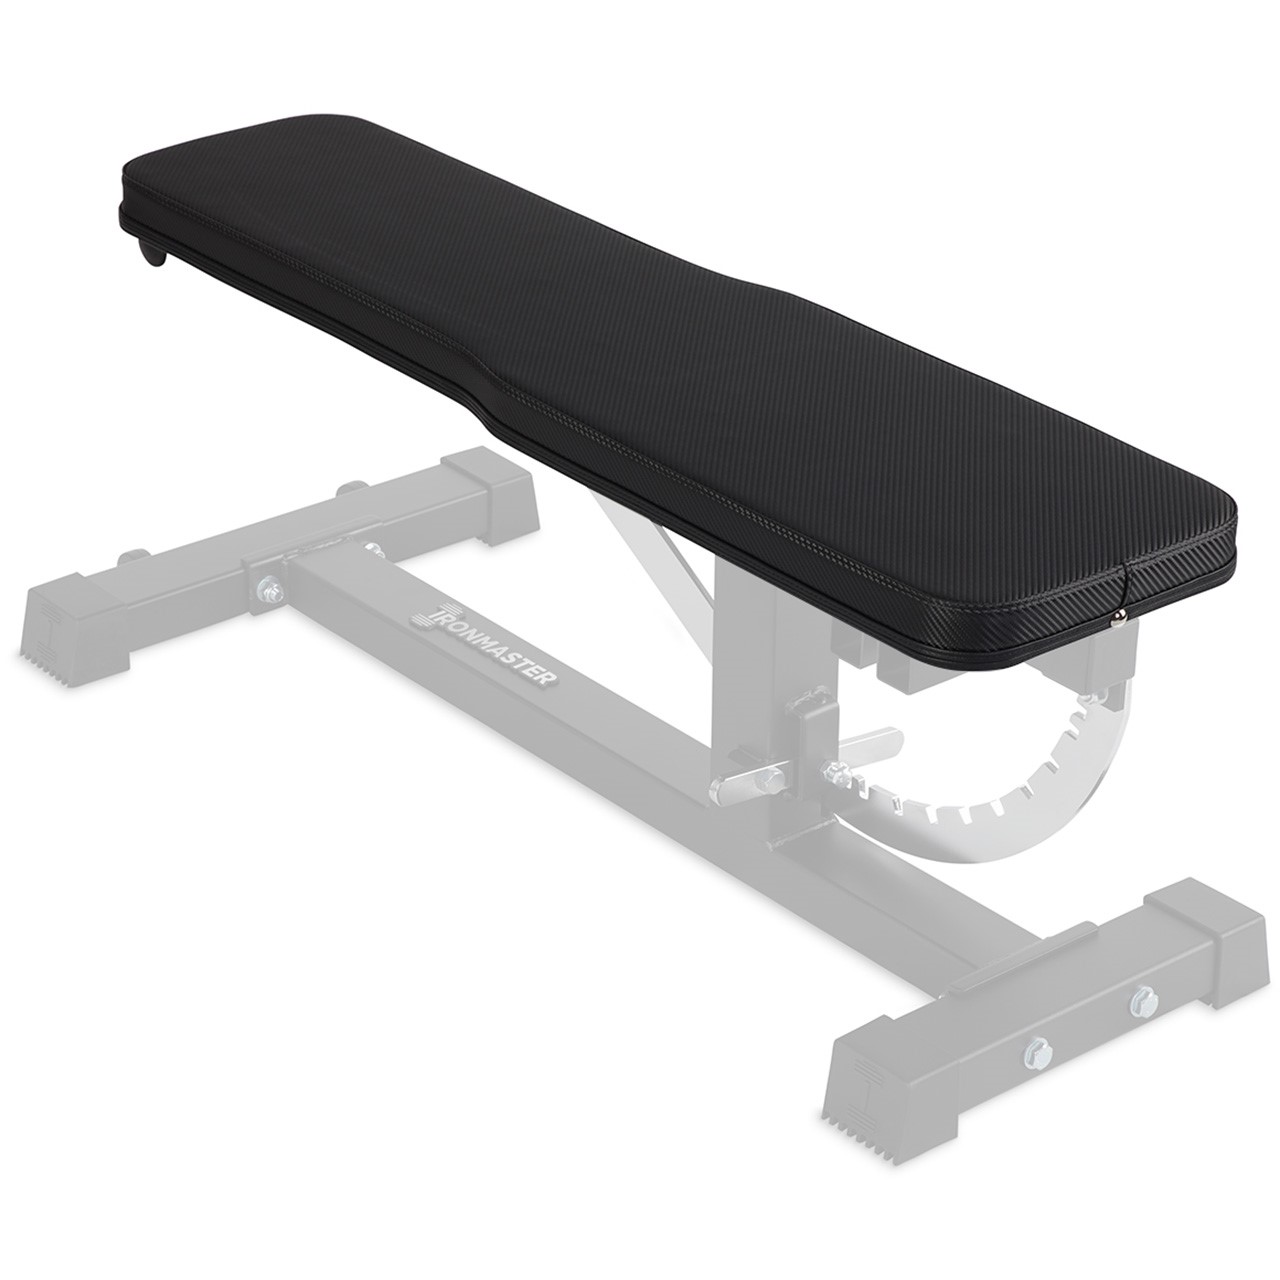 Ironmaster Hybrid Bench Pad (for Super Bench and PRO)